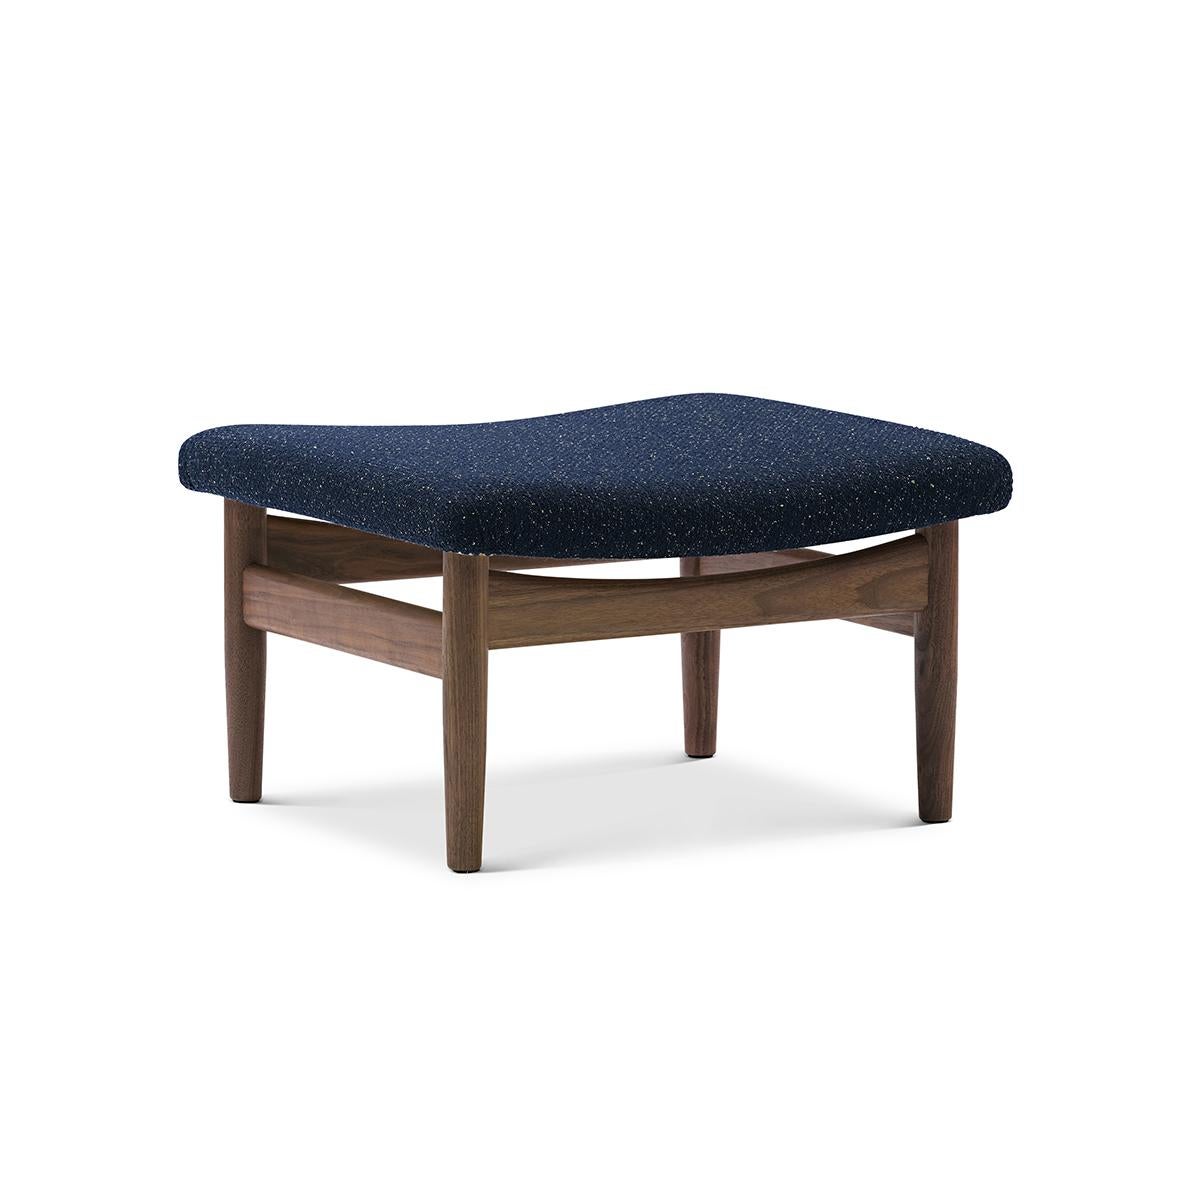 Stool designed by Finn Juhl in 1957, relaunched in 2007.
Manufactured by House of Finn Juhl in Denmark.

Finn Juhl designed footrests for a few of his iconic furniture pieces, including the Japan Series. 

The Japan footstool with its organic shaped